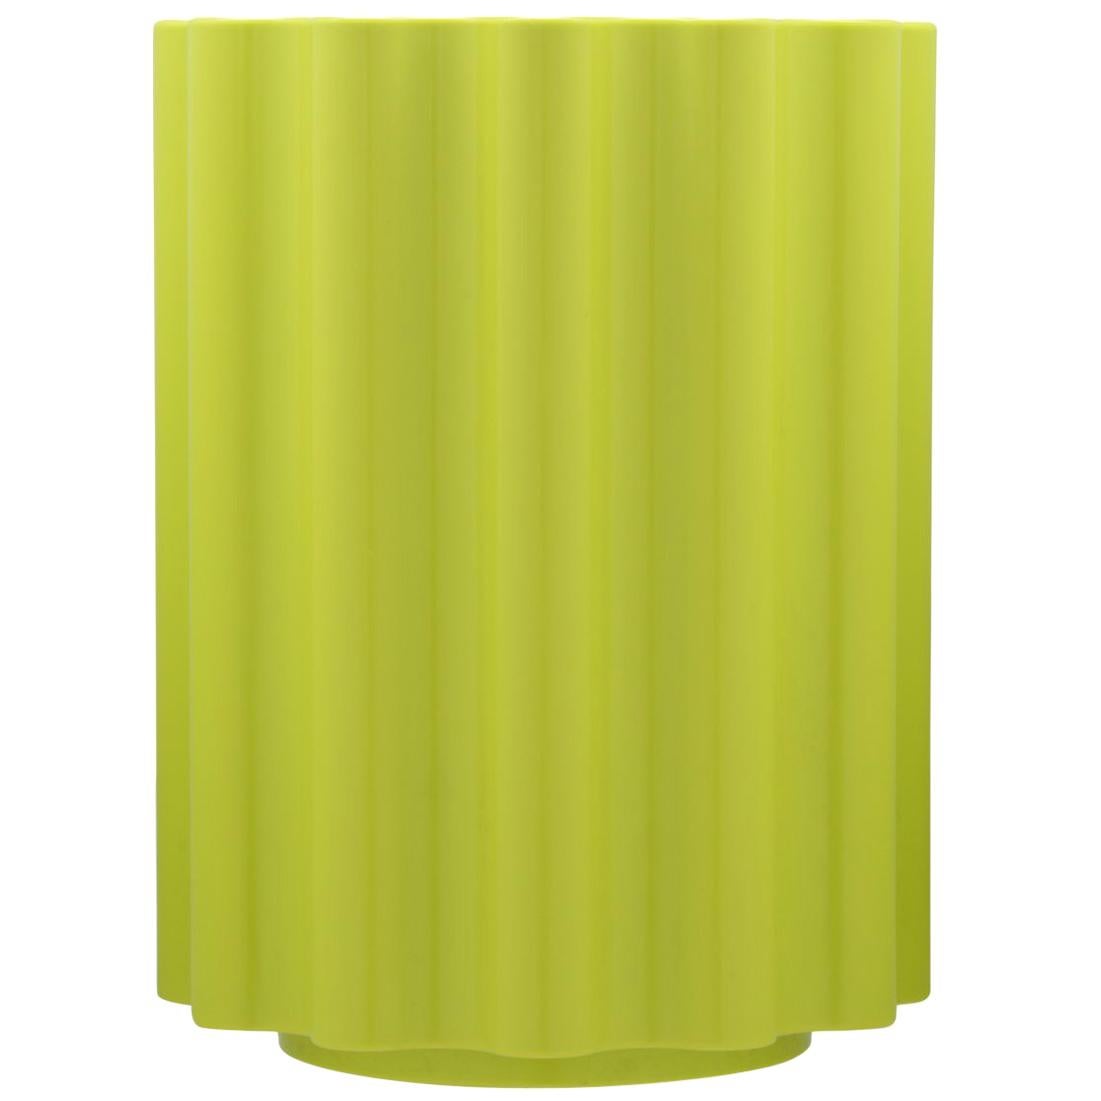 Kartell Colonna Stool in Green by Ettore Sottsass